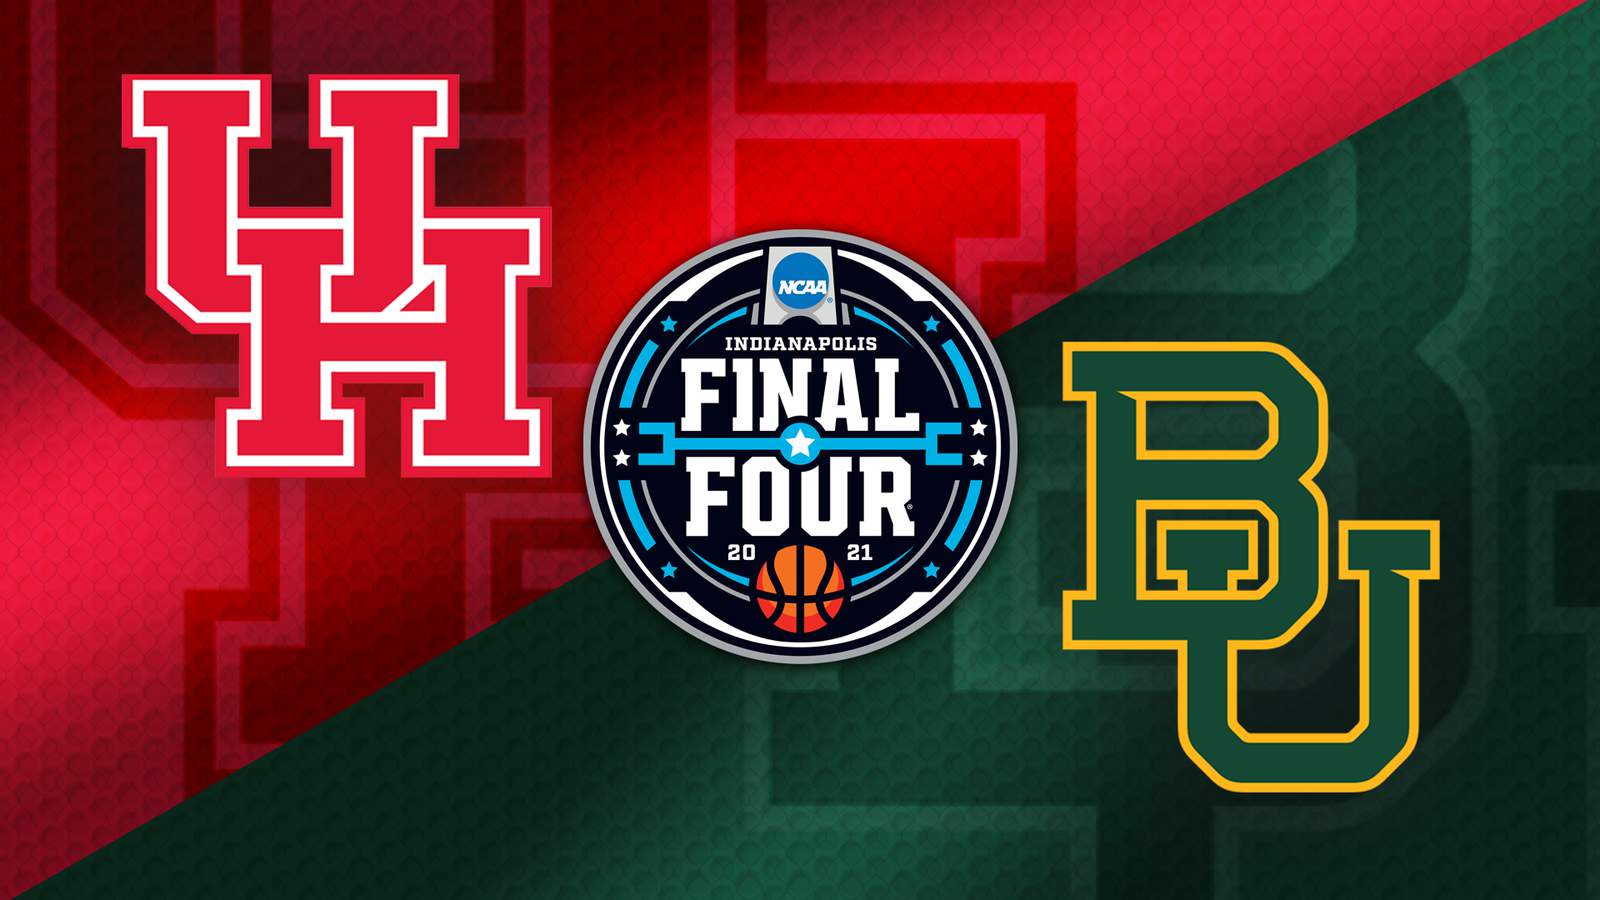 UH vs. Baylor: Social media buzzes with excitement, anticipation for big NCAA Final Four game